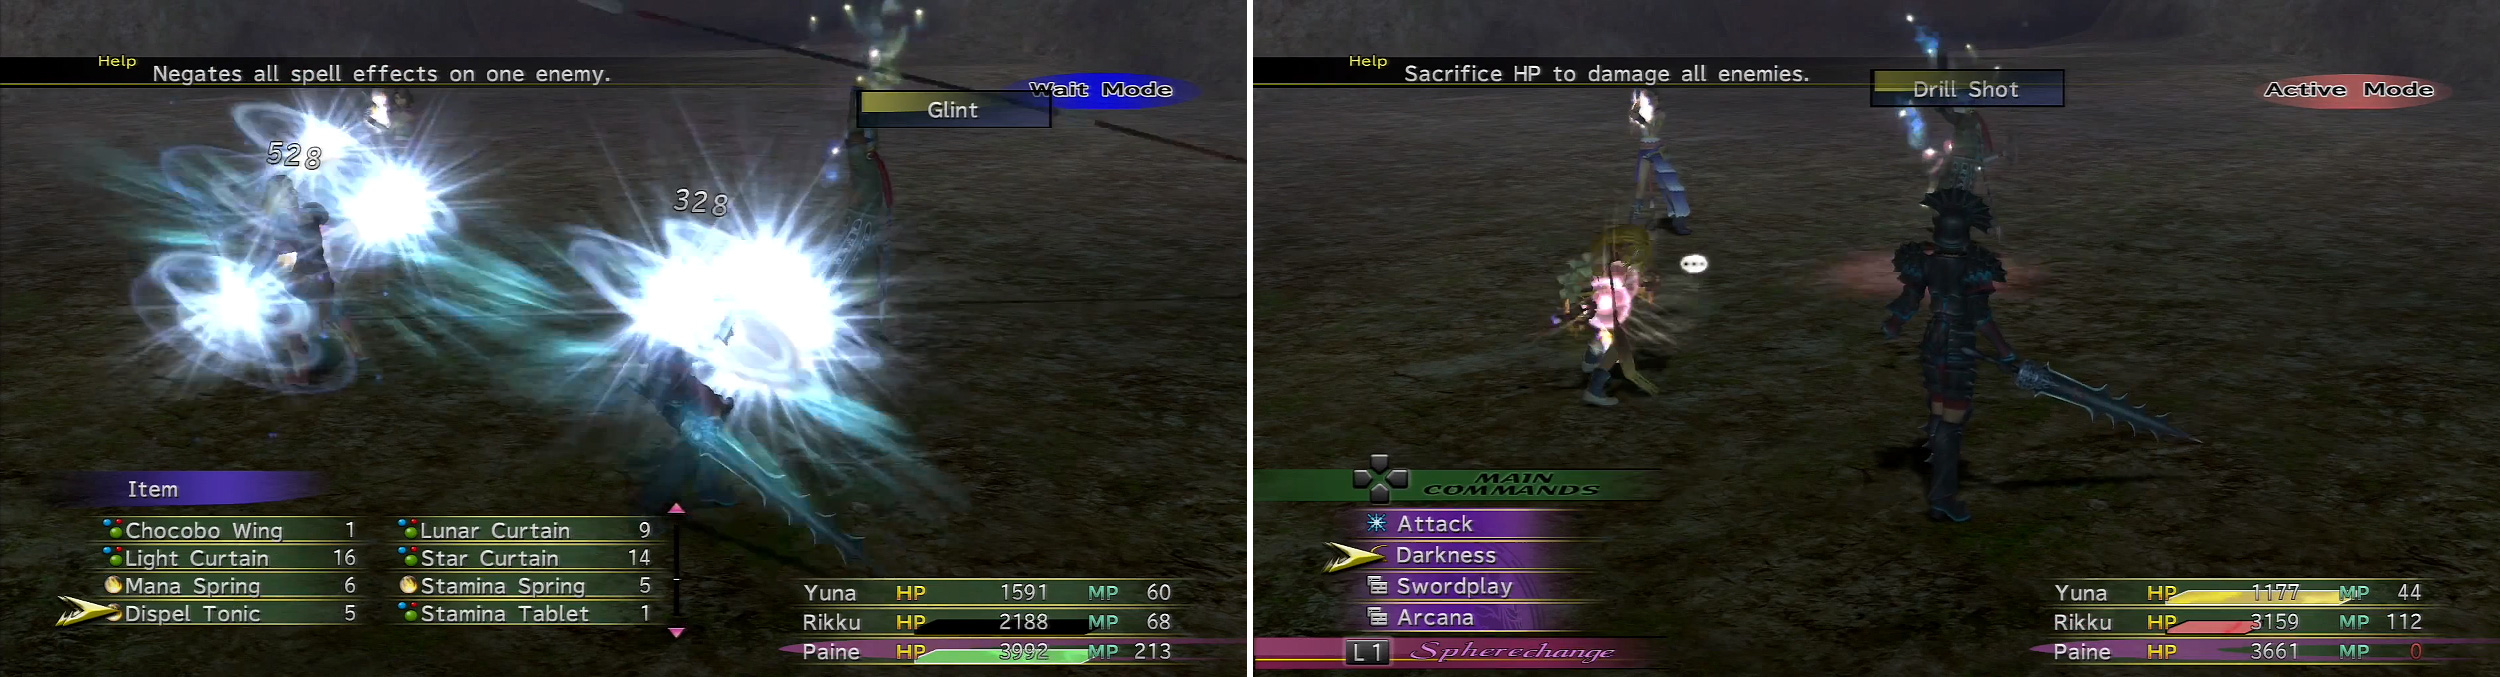 Baralai uses Glint (left) to hit everyone, and later, the nasty Drill Shot (right) which can be mitigated with Protect.